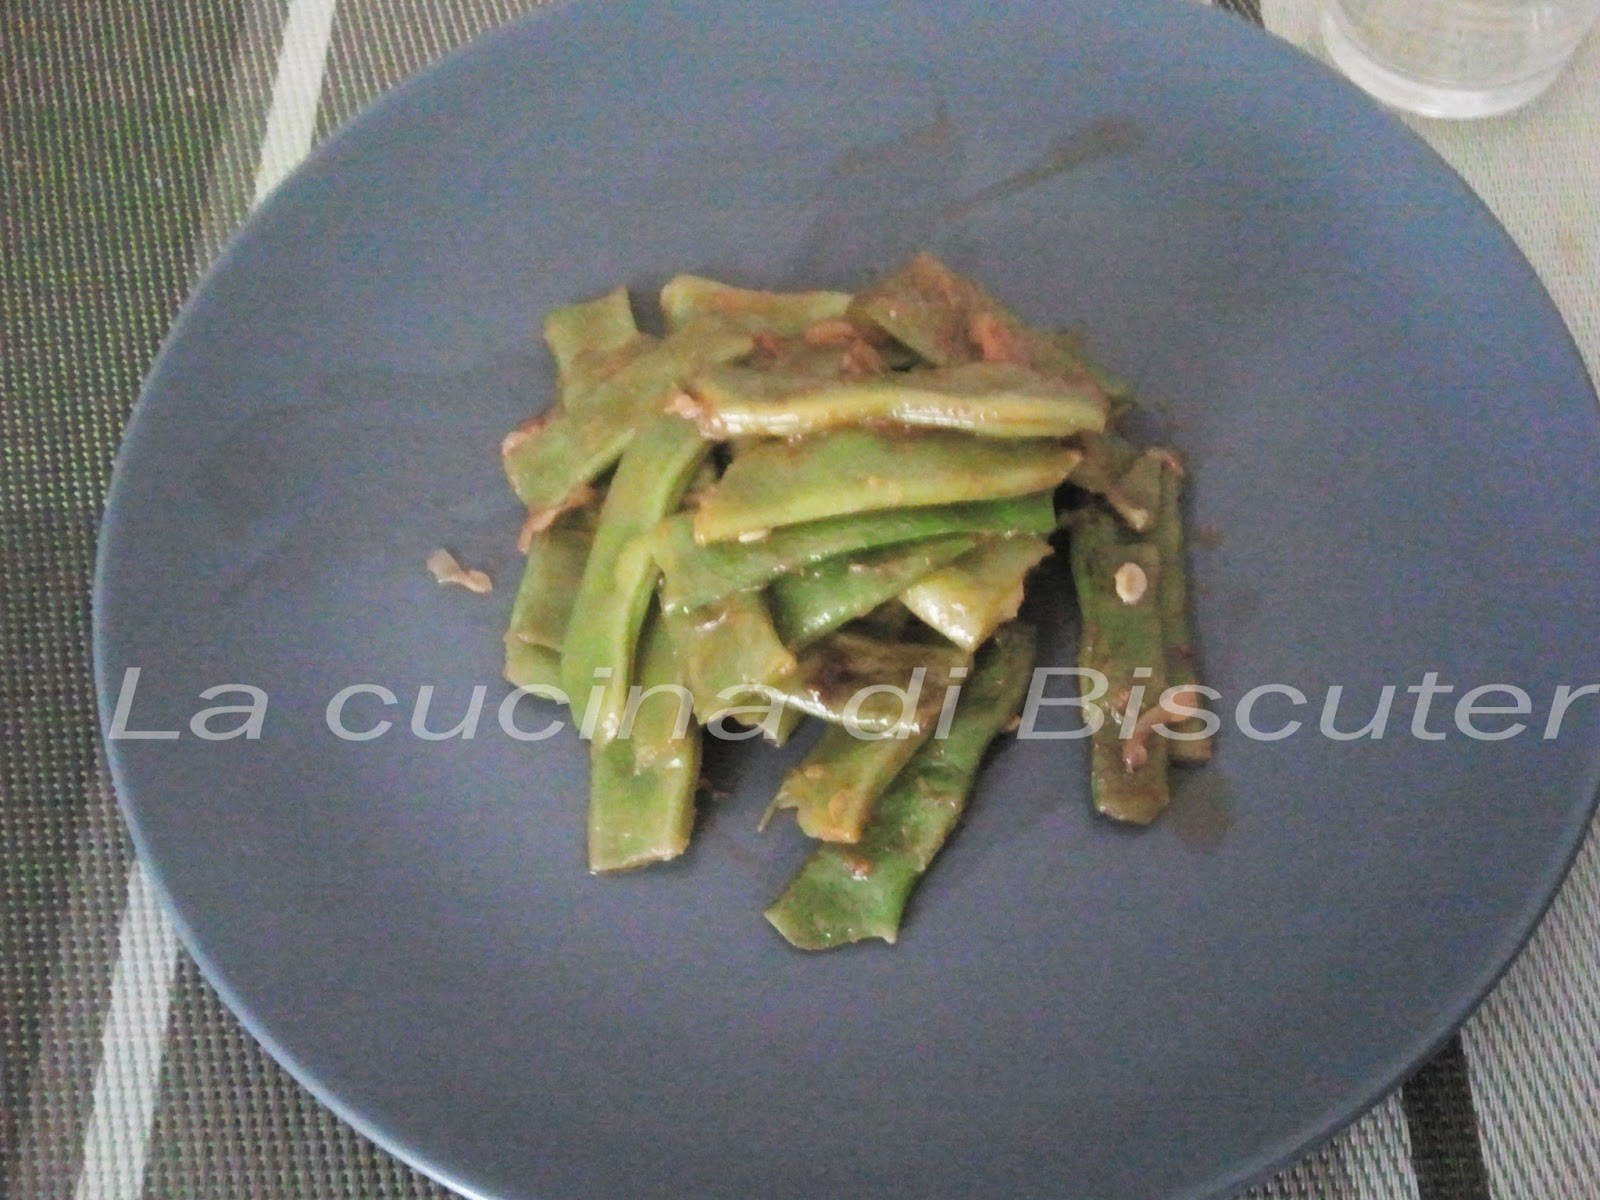 La Cucina Di Biscuter Fagiolini Alle Spezie In Agrodolce Green Beans With Spices And Sour